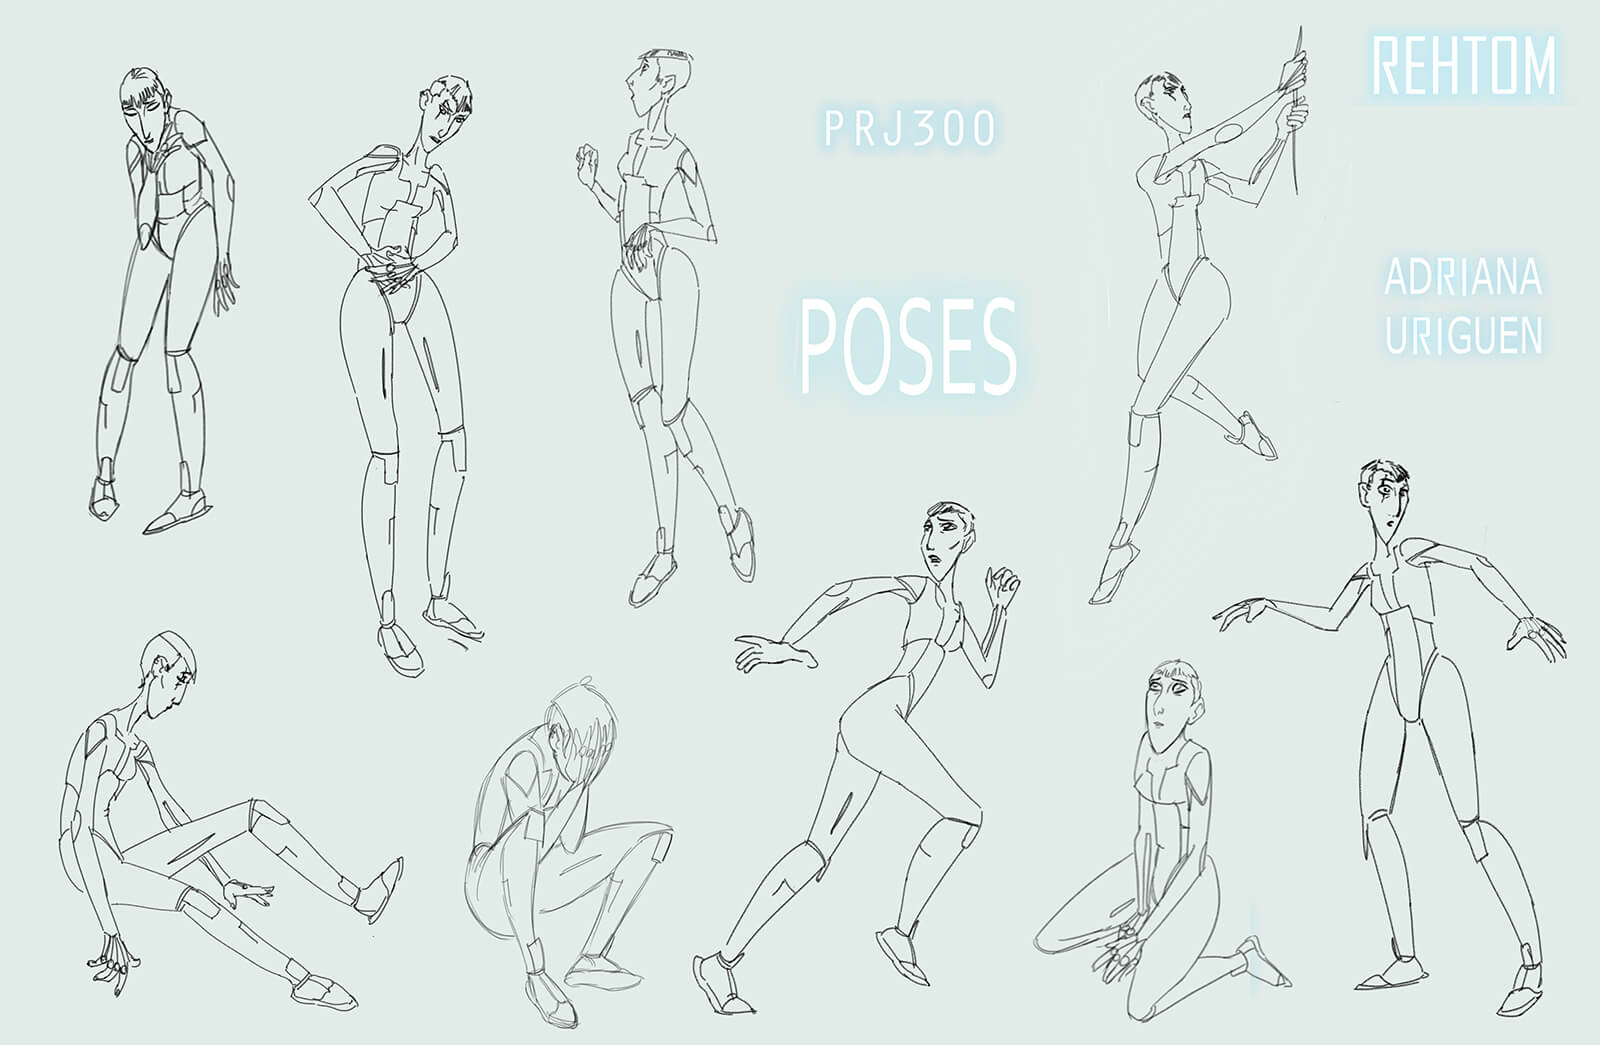 Black-and-white sketches of poses for a tall, thin woman, including running, sitting, and kneeling among others